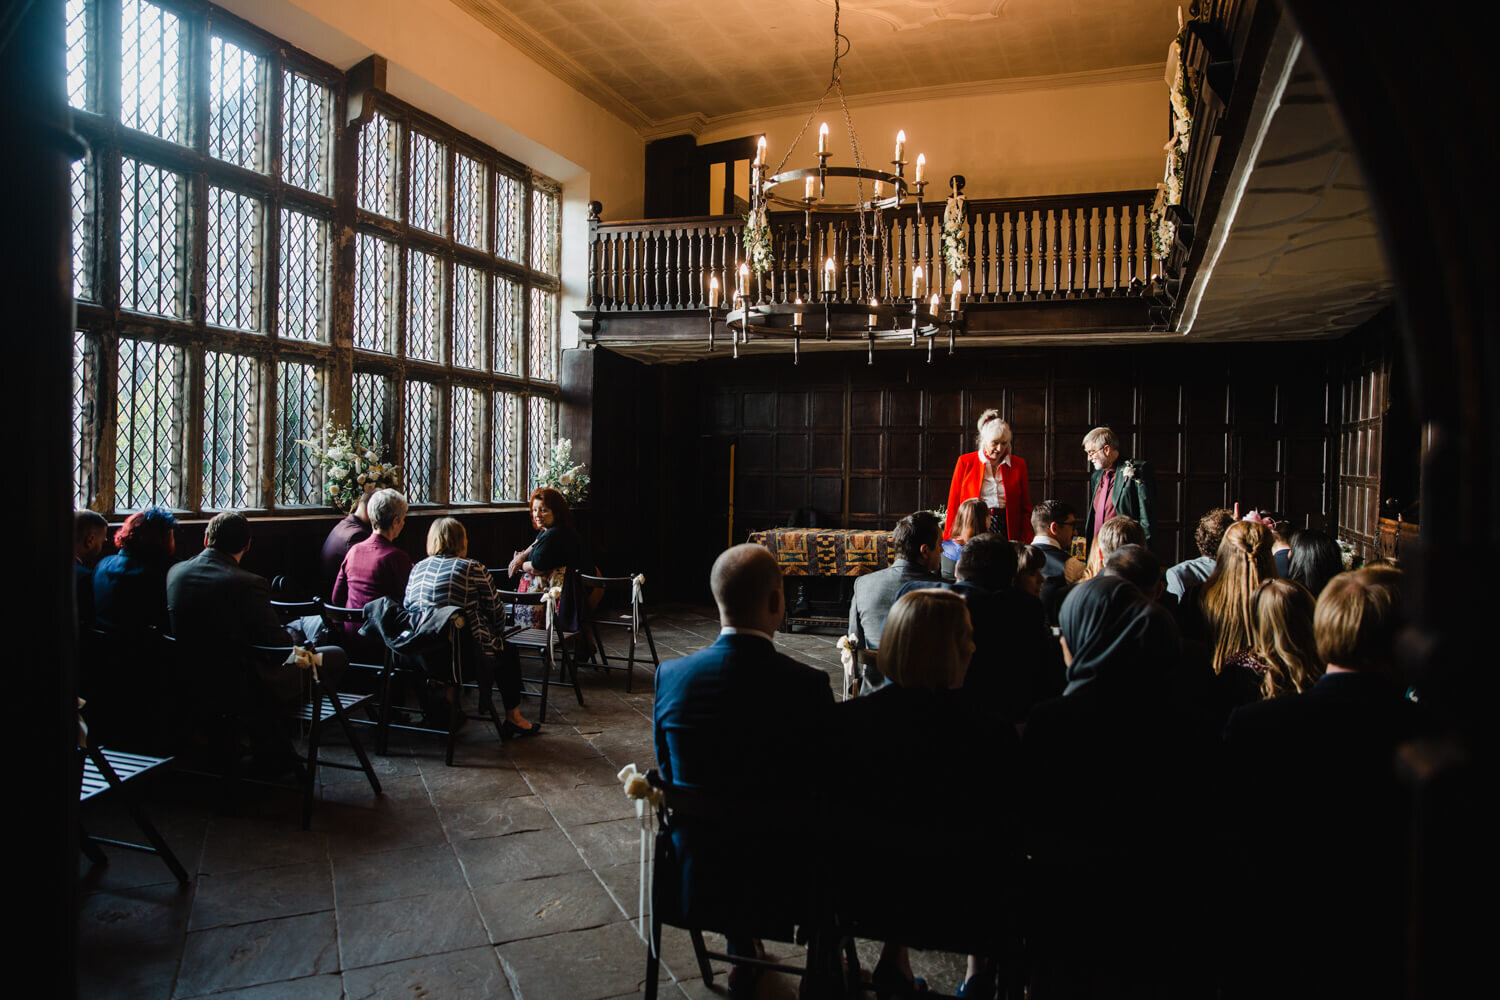 Oakwell Hall wedding ceremony room populated by wedding guests